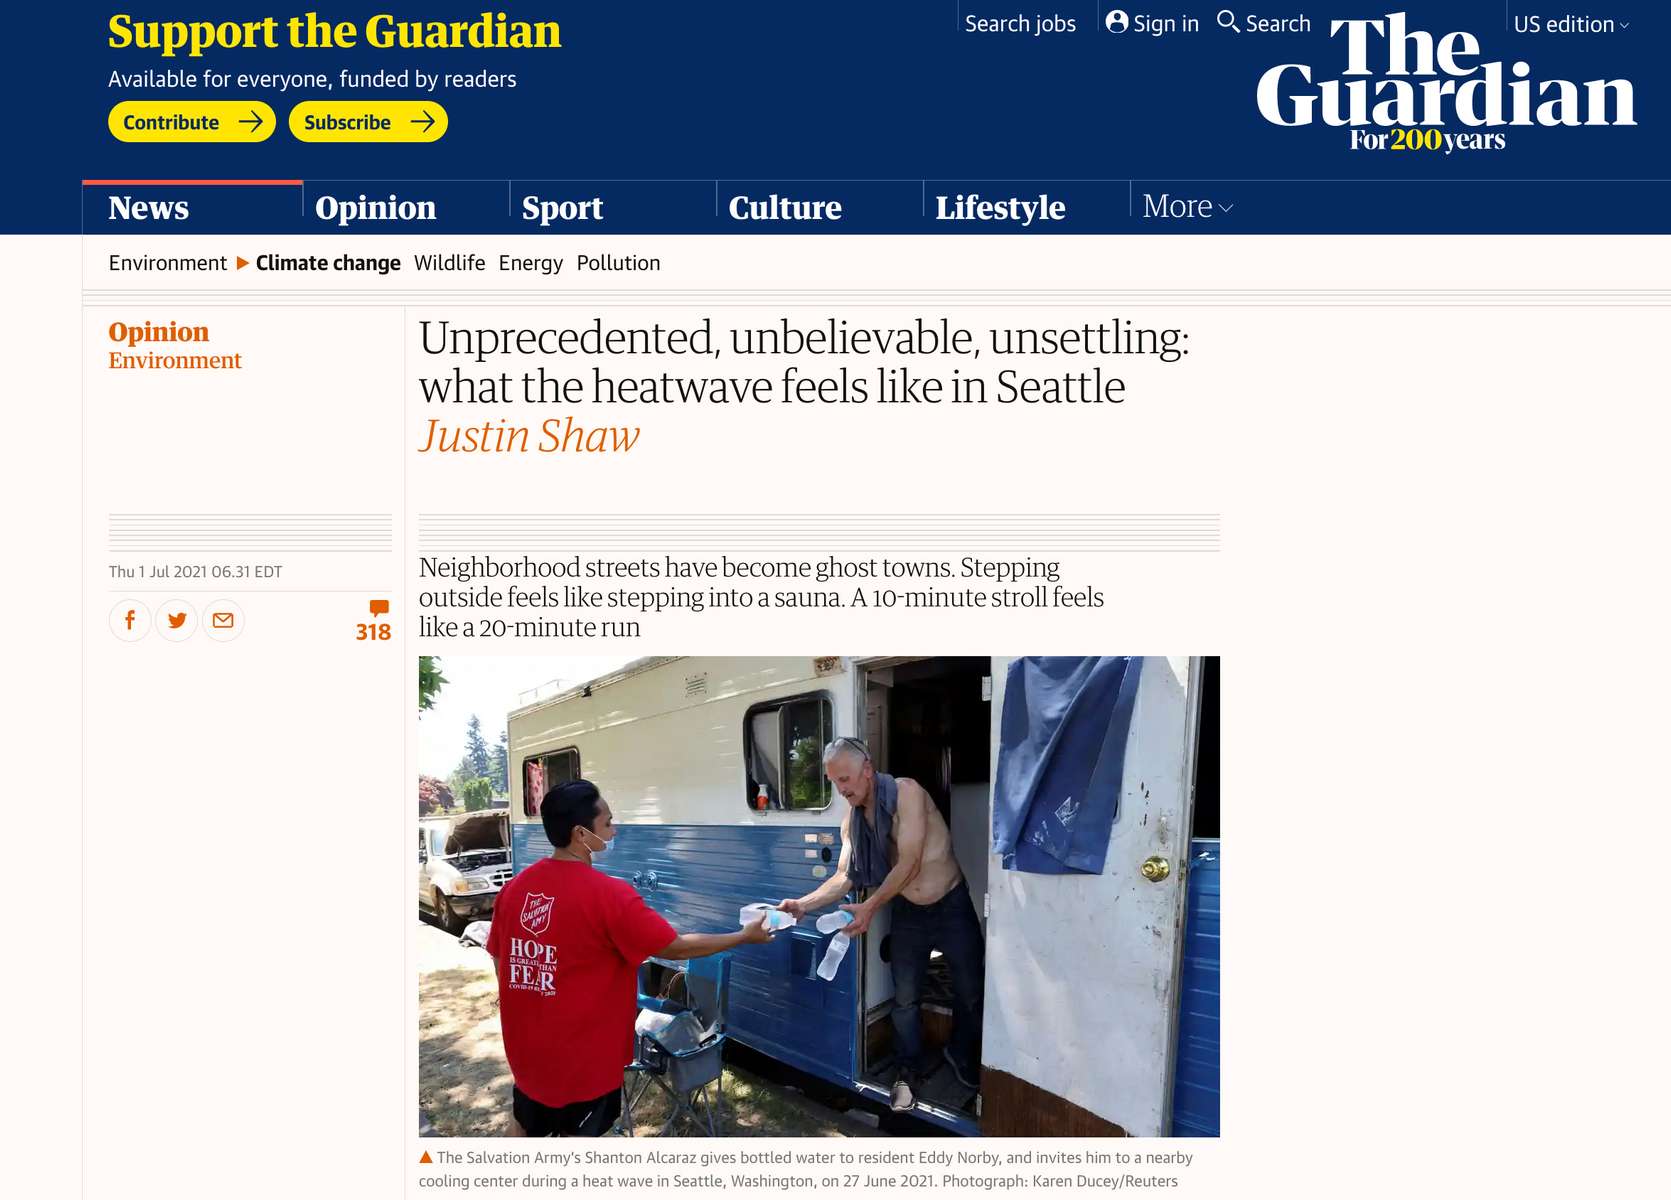 {quote}Unprecedented, unbelievable, unsettling: what the heatwave feels like in Seattle{quote} for Reuters. Published in The Guardian July 1, 2021